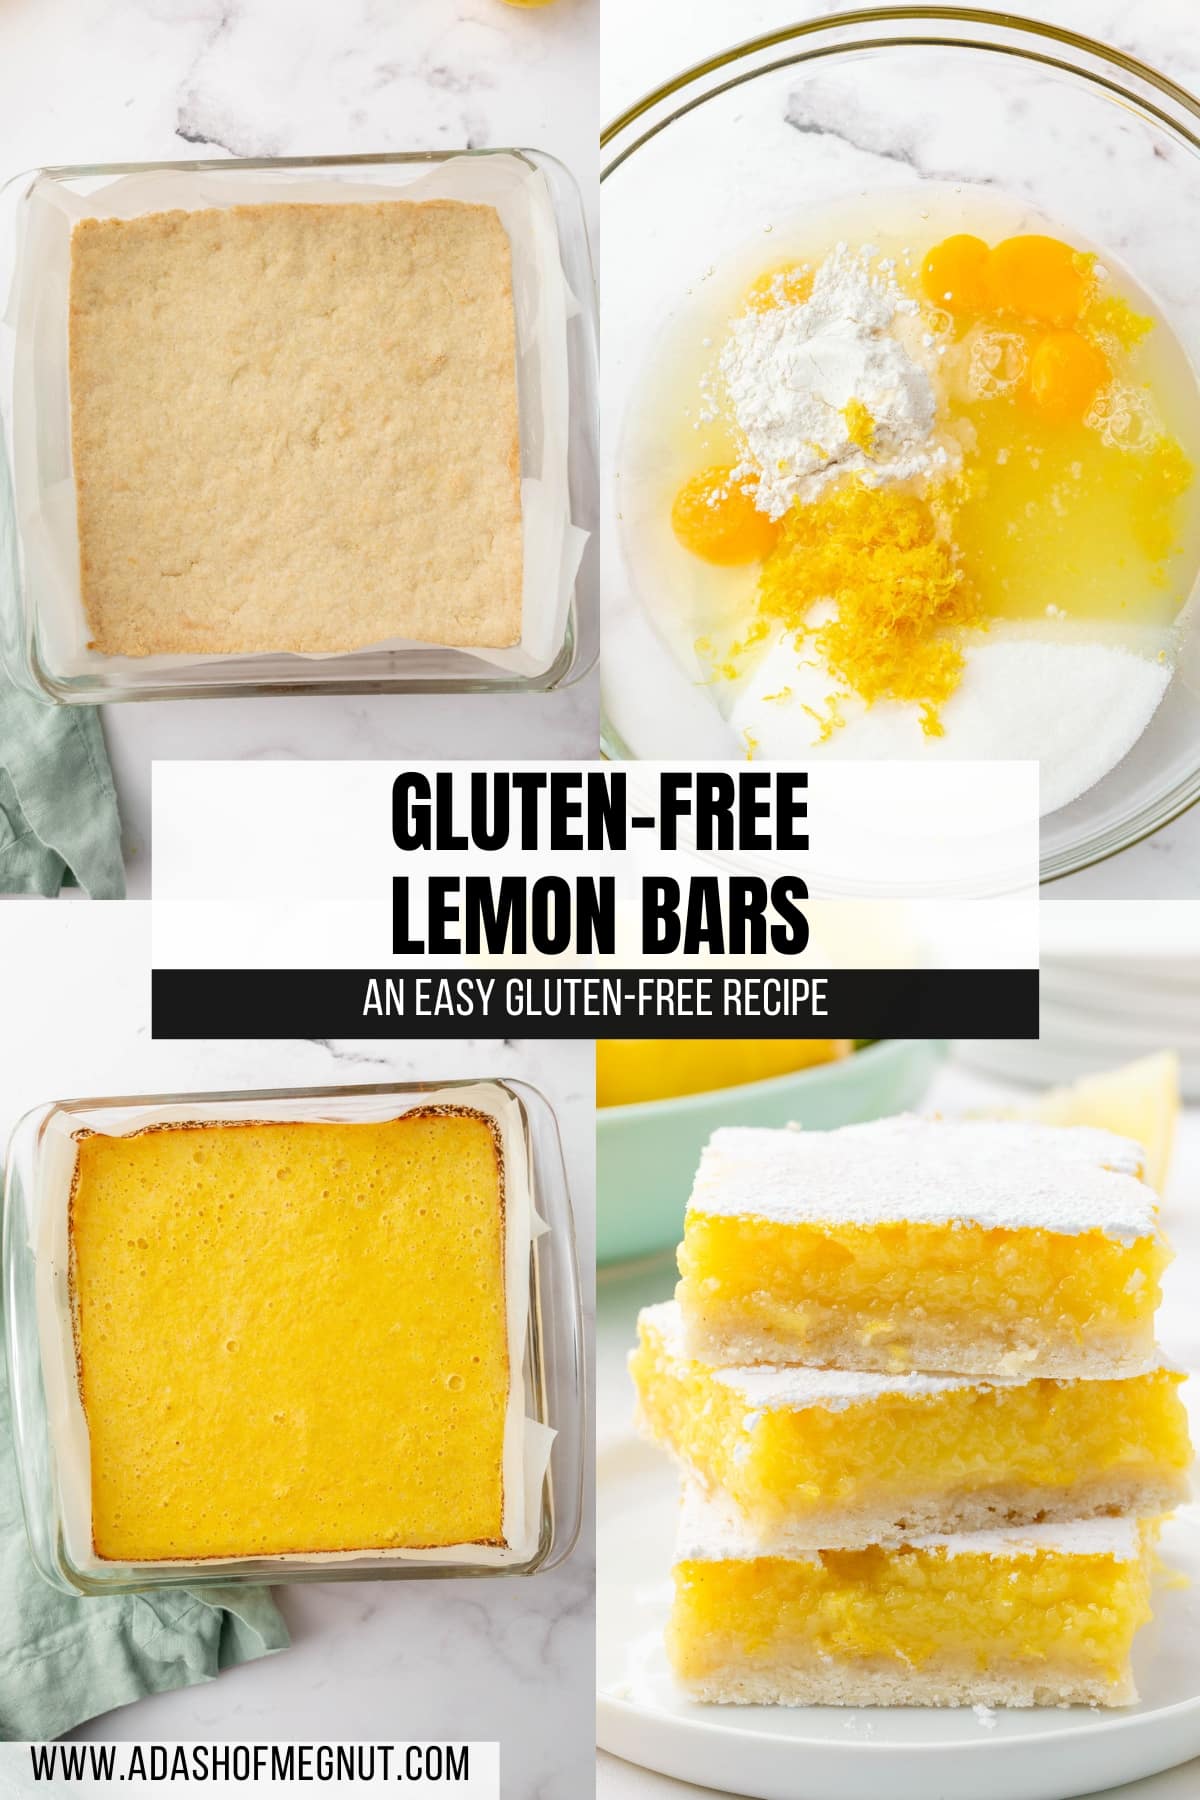 A four photo collage showing the process of making gluten free lemon bars. Photo 1: A gluten-free shortbread crust in a square glass baking dish. Photo 2: A glass mixing bowl with eggs, gluten-free flour, lemon juice, lemon zest, and granulated sugar before mixing together. Photo 3: Baked gluten free lemon bars in a glass square baking dish. Photo 4: A stack of three gluten free lemon bars on a dessert plate.